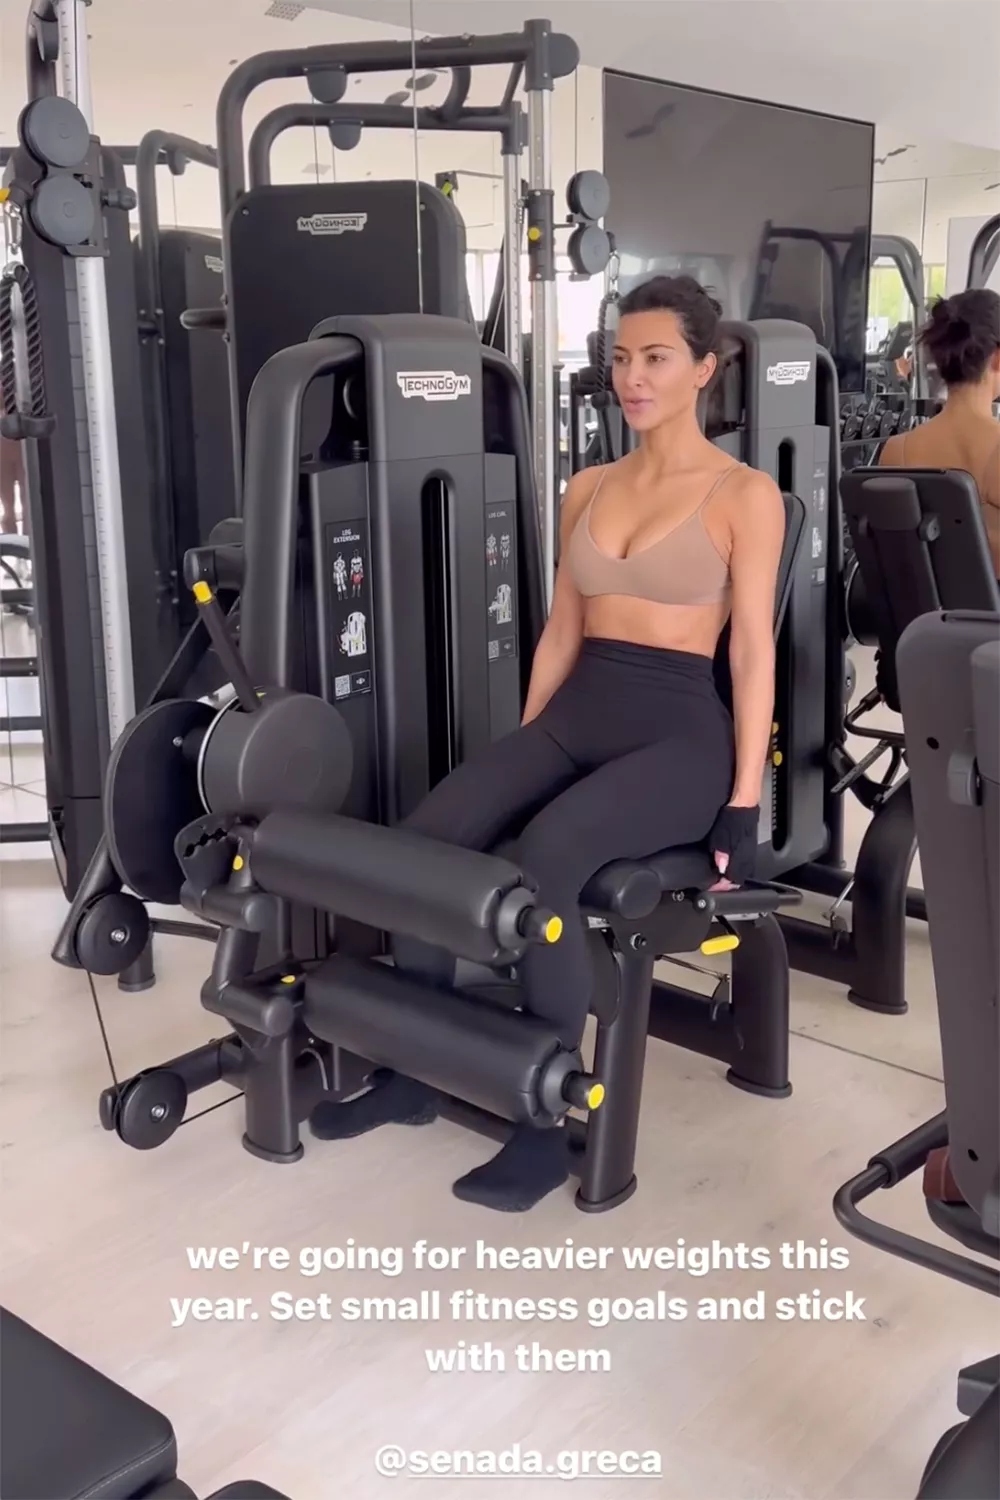 Fab at 43: Kim Kardashian rings in New Year with ‘Fitness Treat’